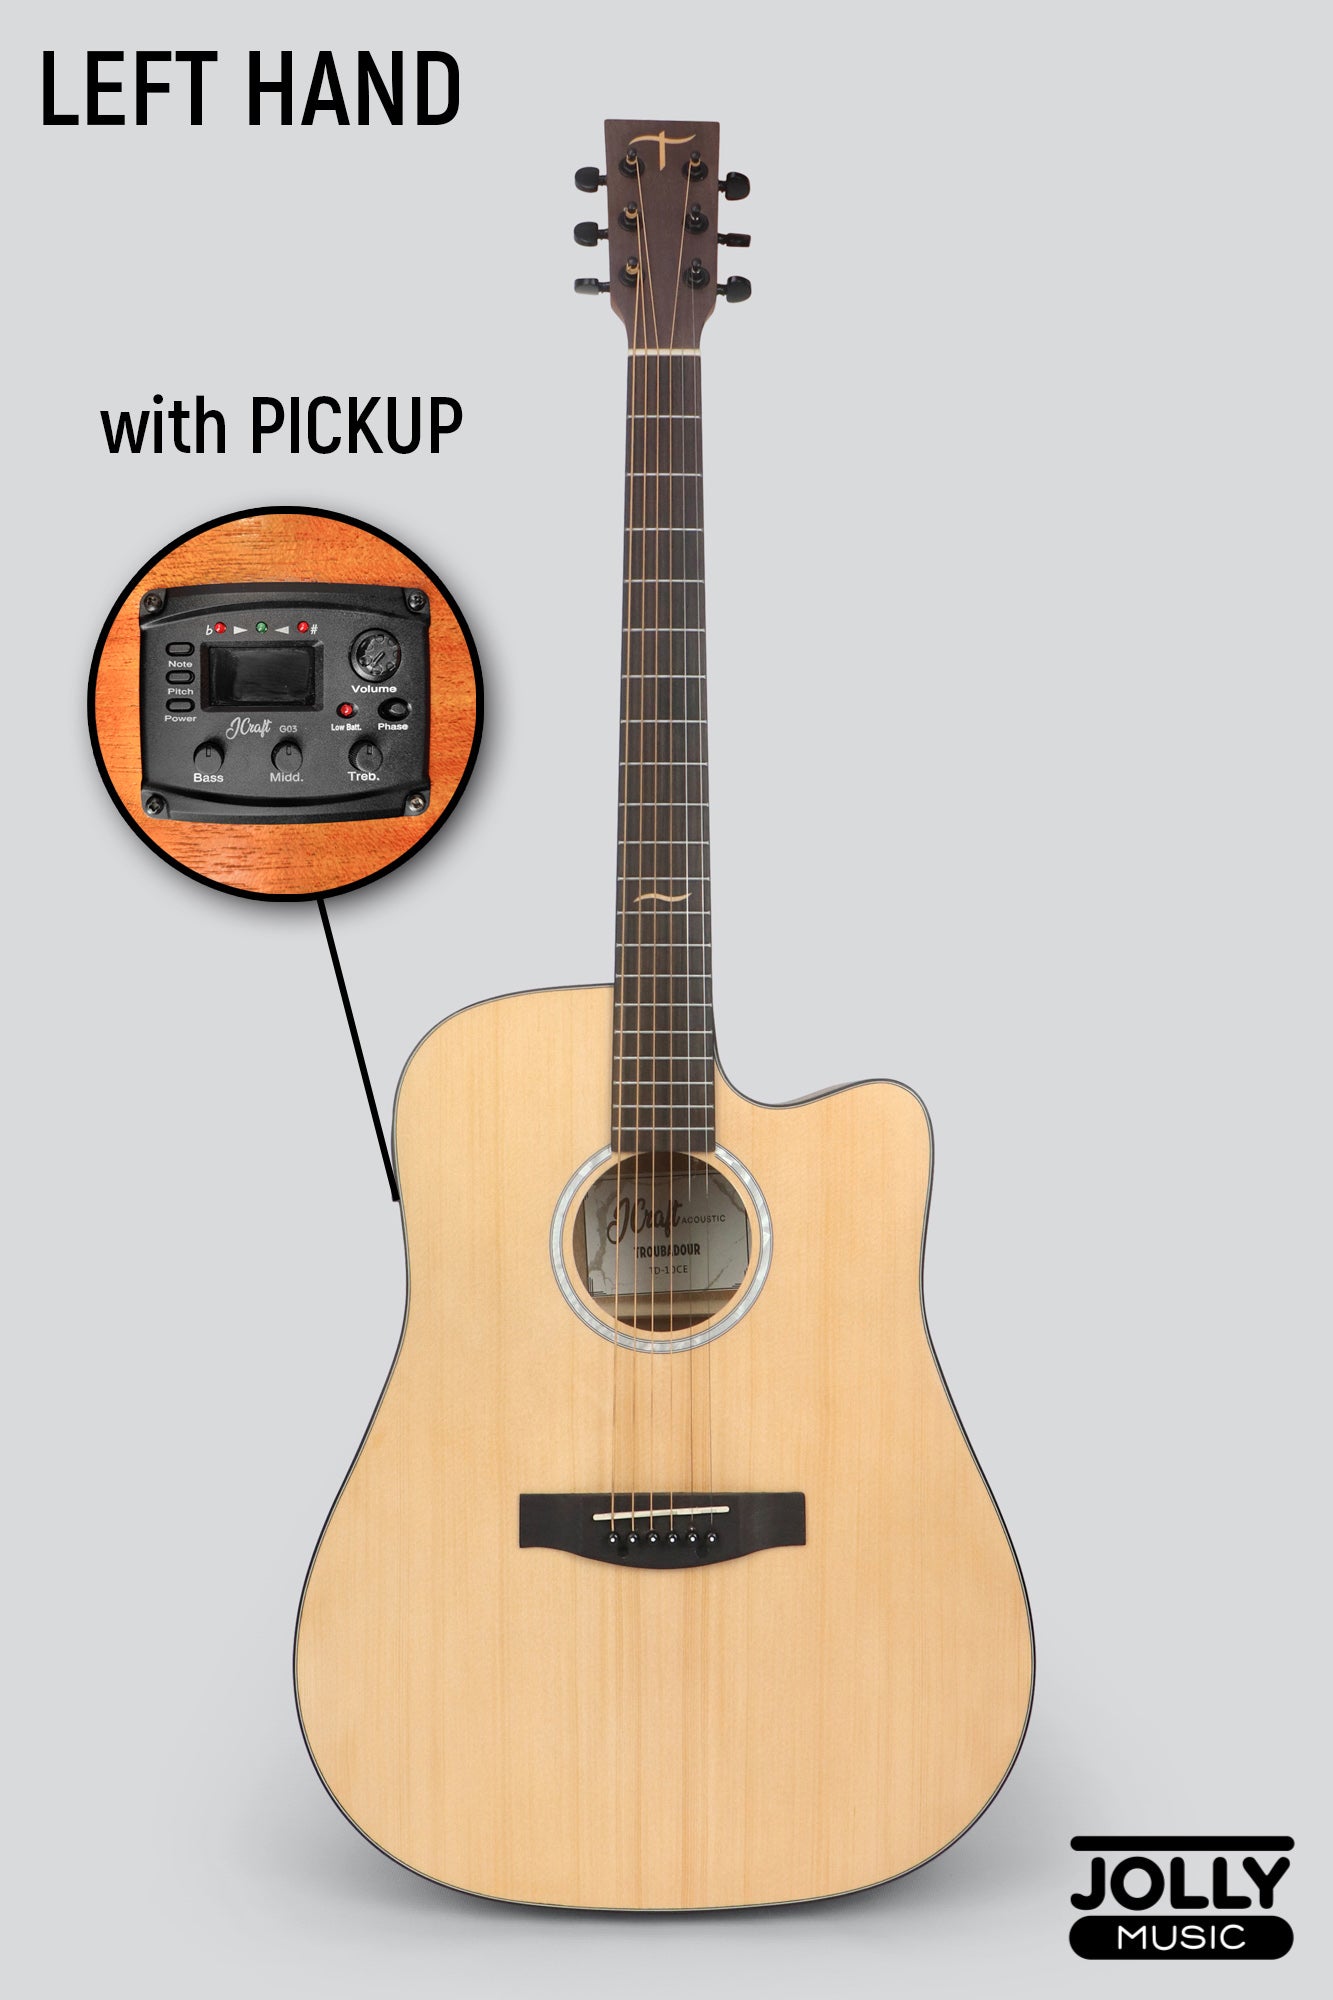 JCraft Troubadour TD-10CE LH Dreadnought Acoustic-Electric Cutaway Guitar with pickup and soft case LEFT HAND